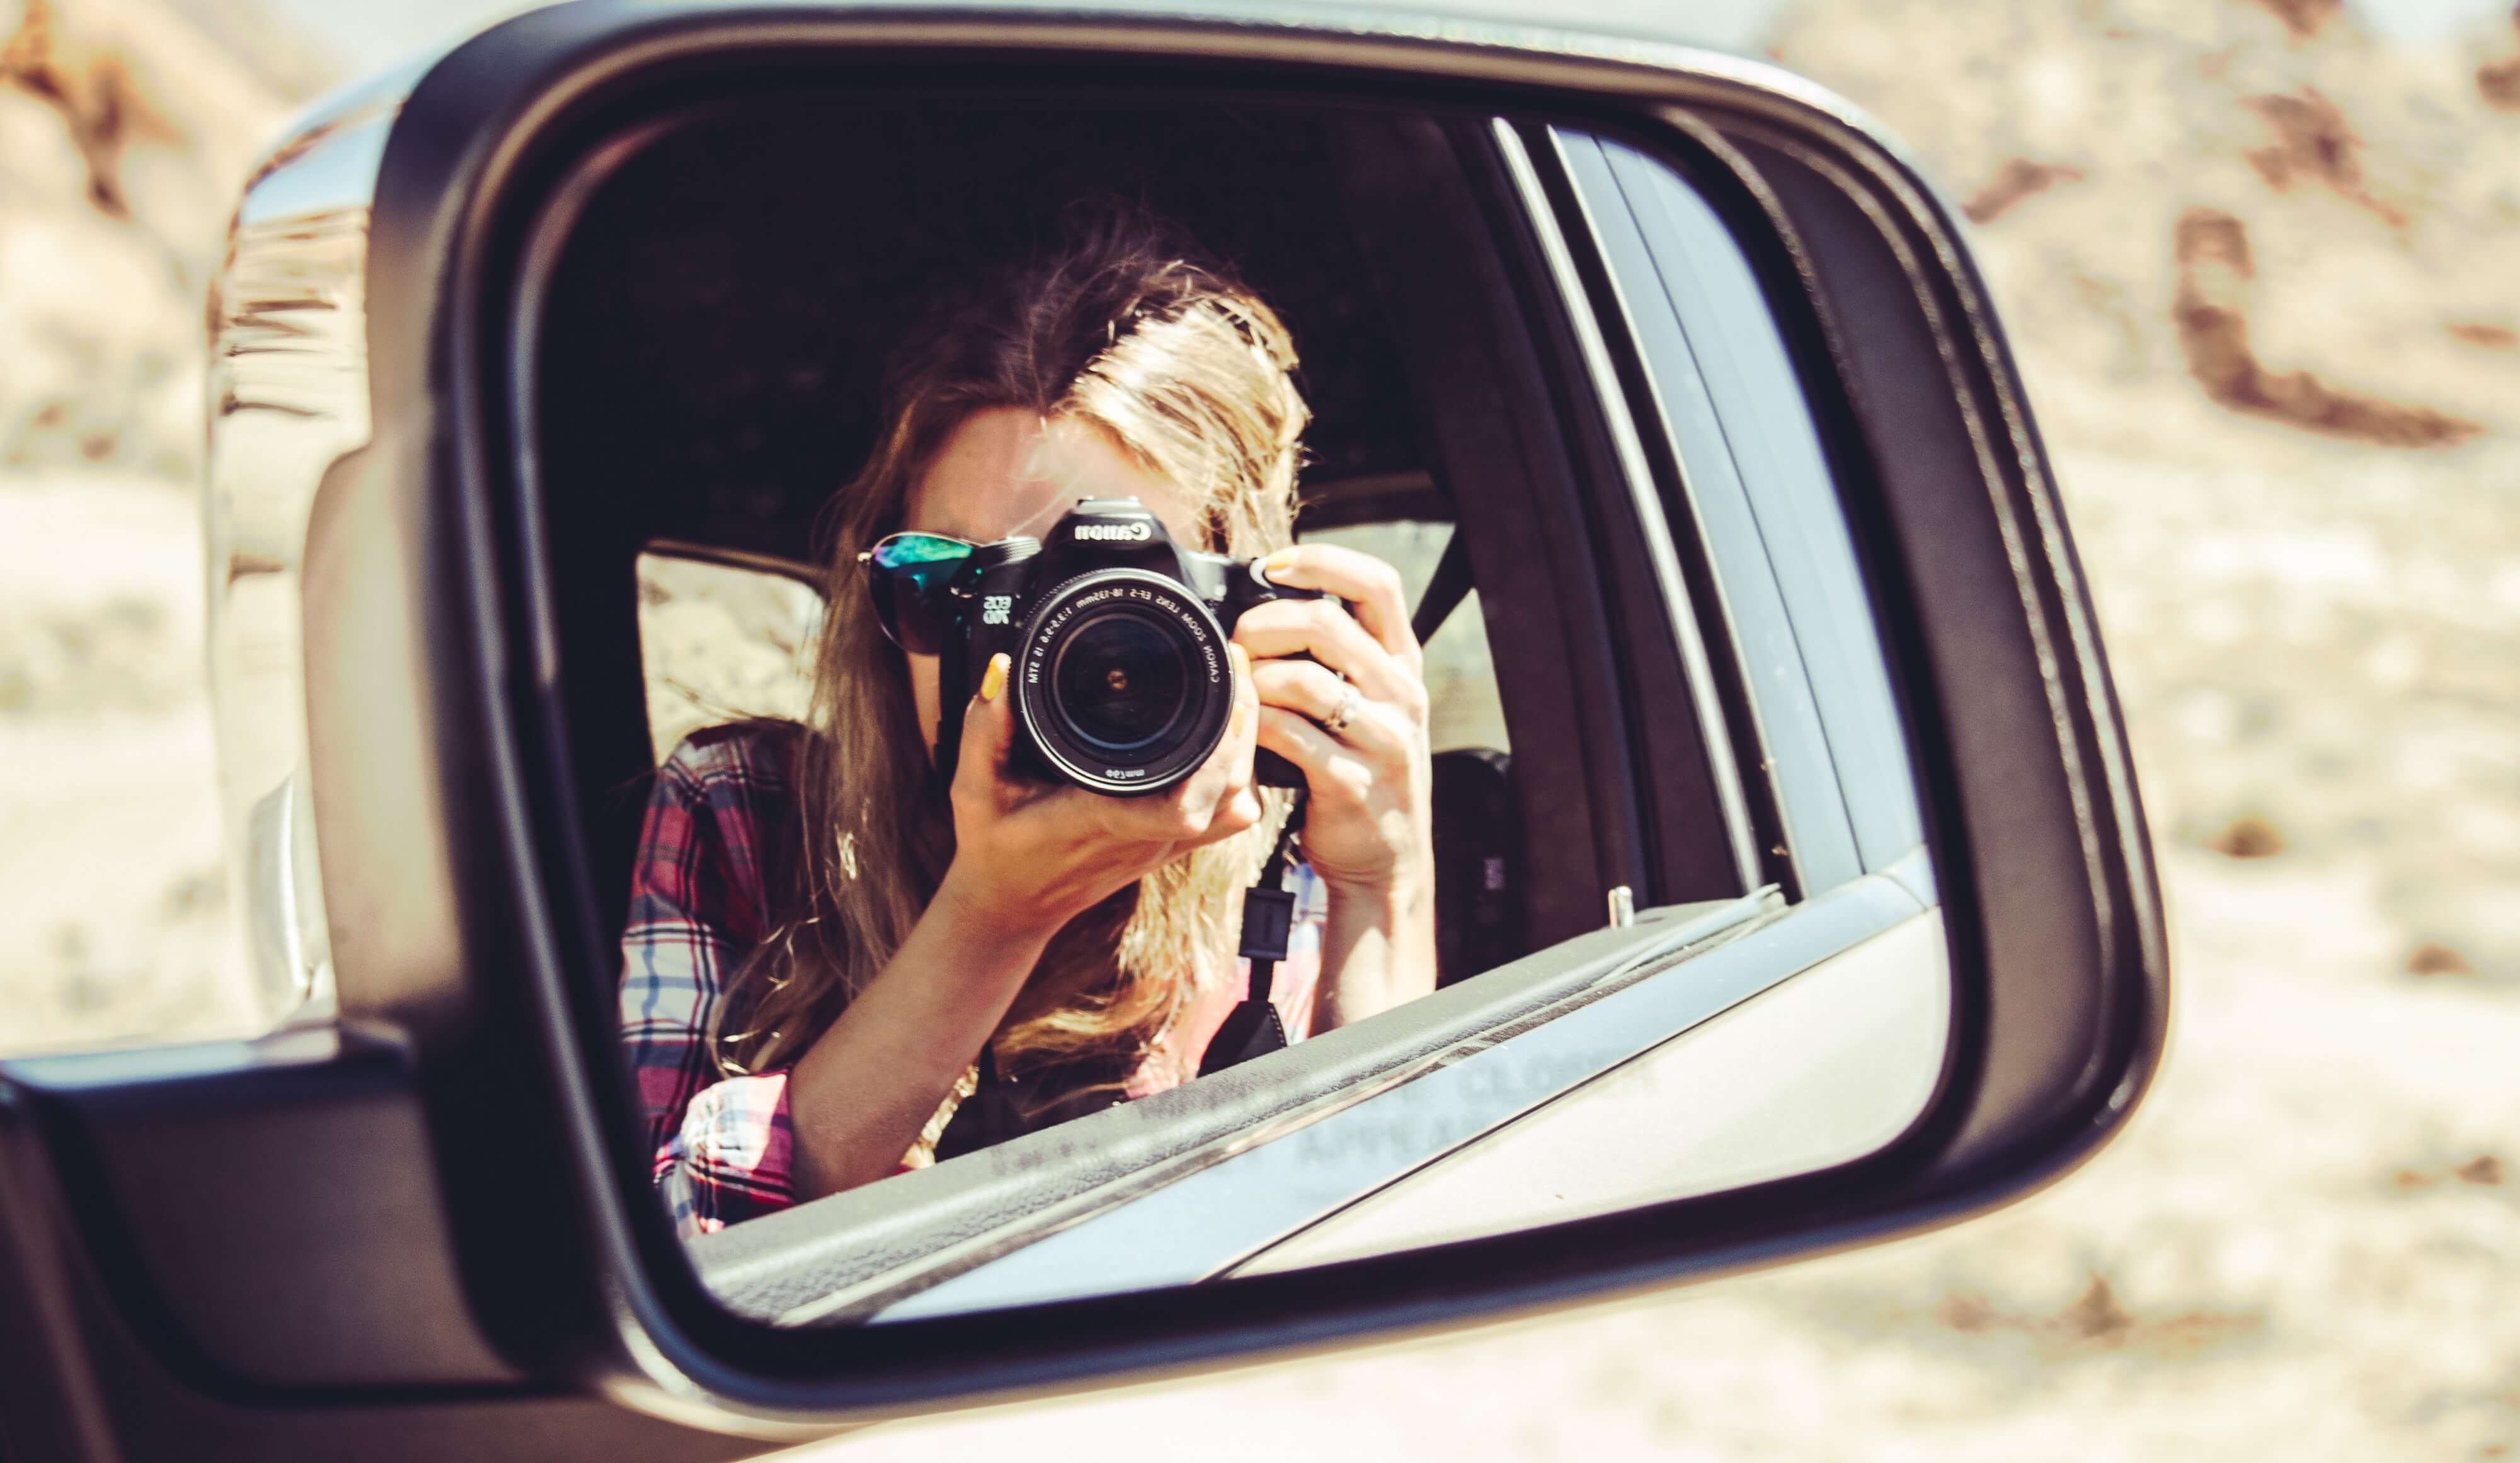 Woman taking photo reflected in car mirror